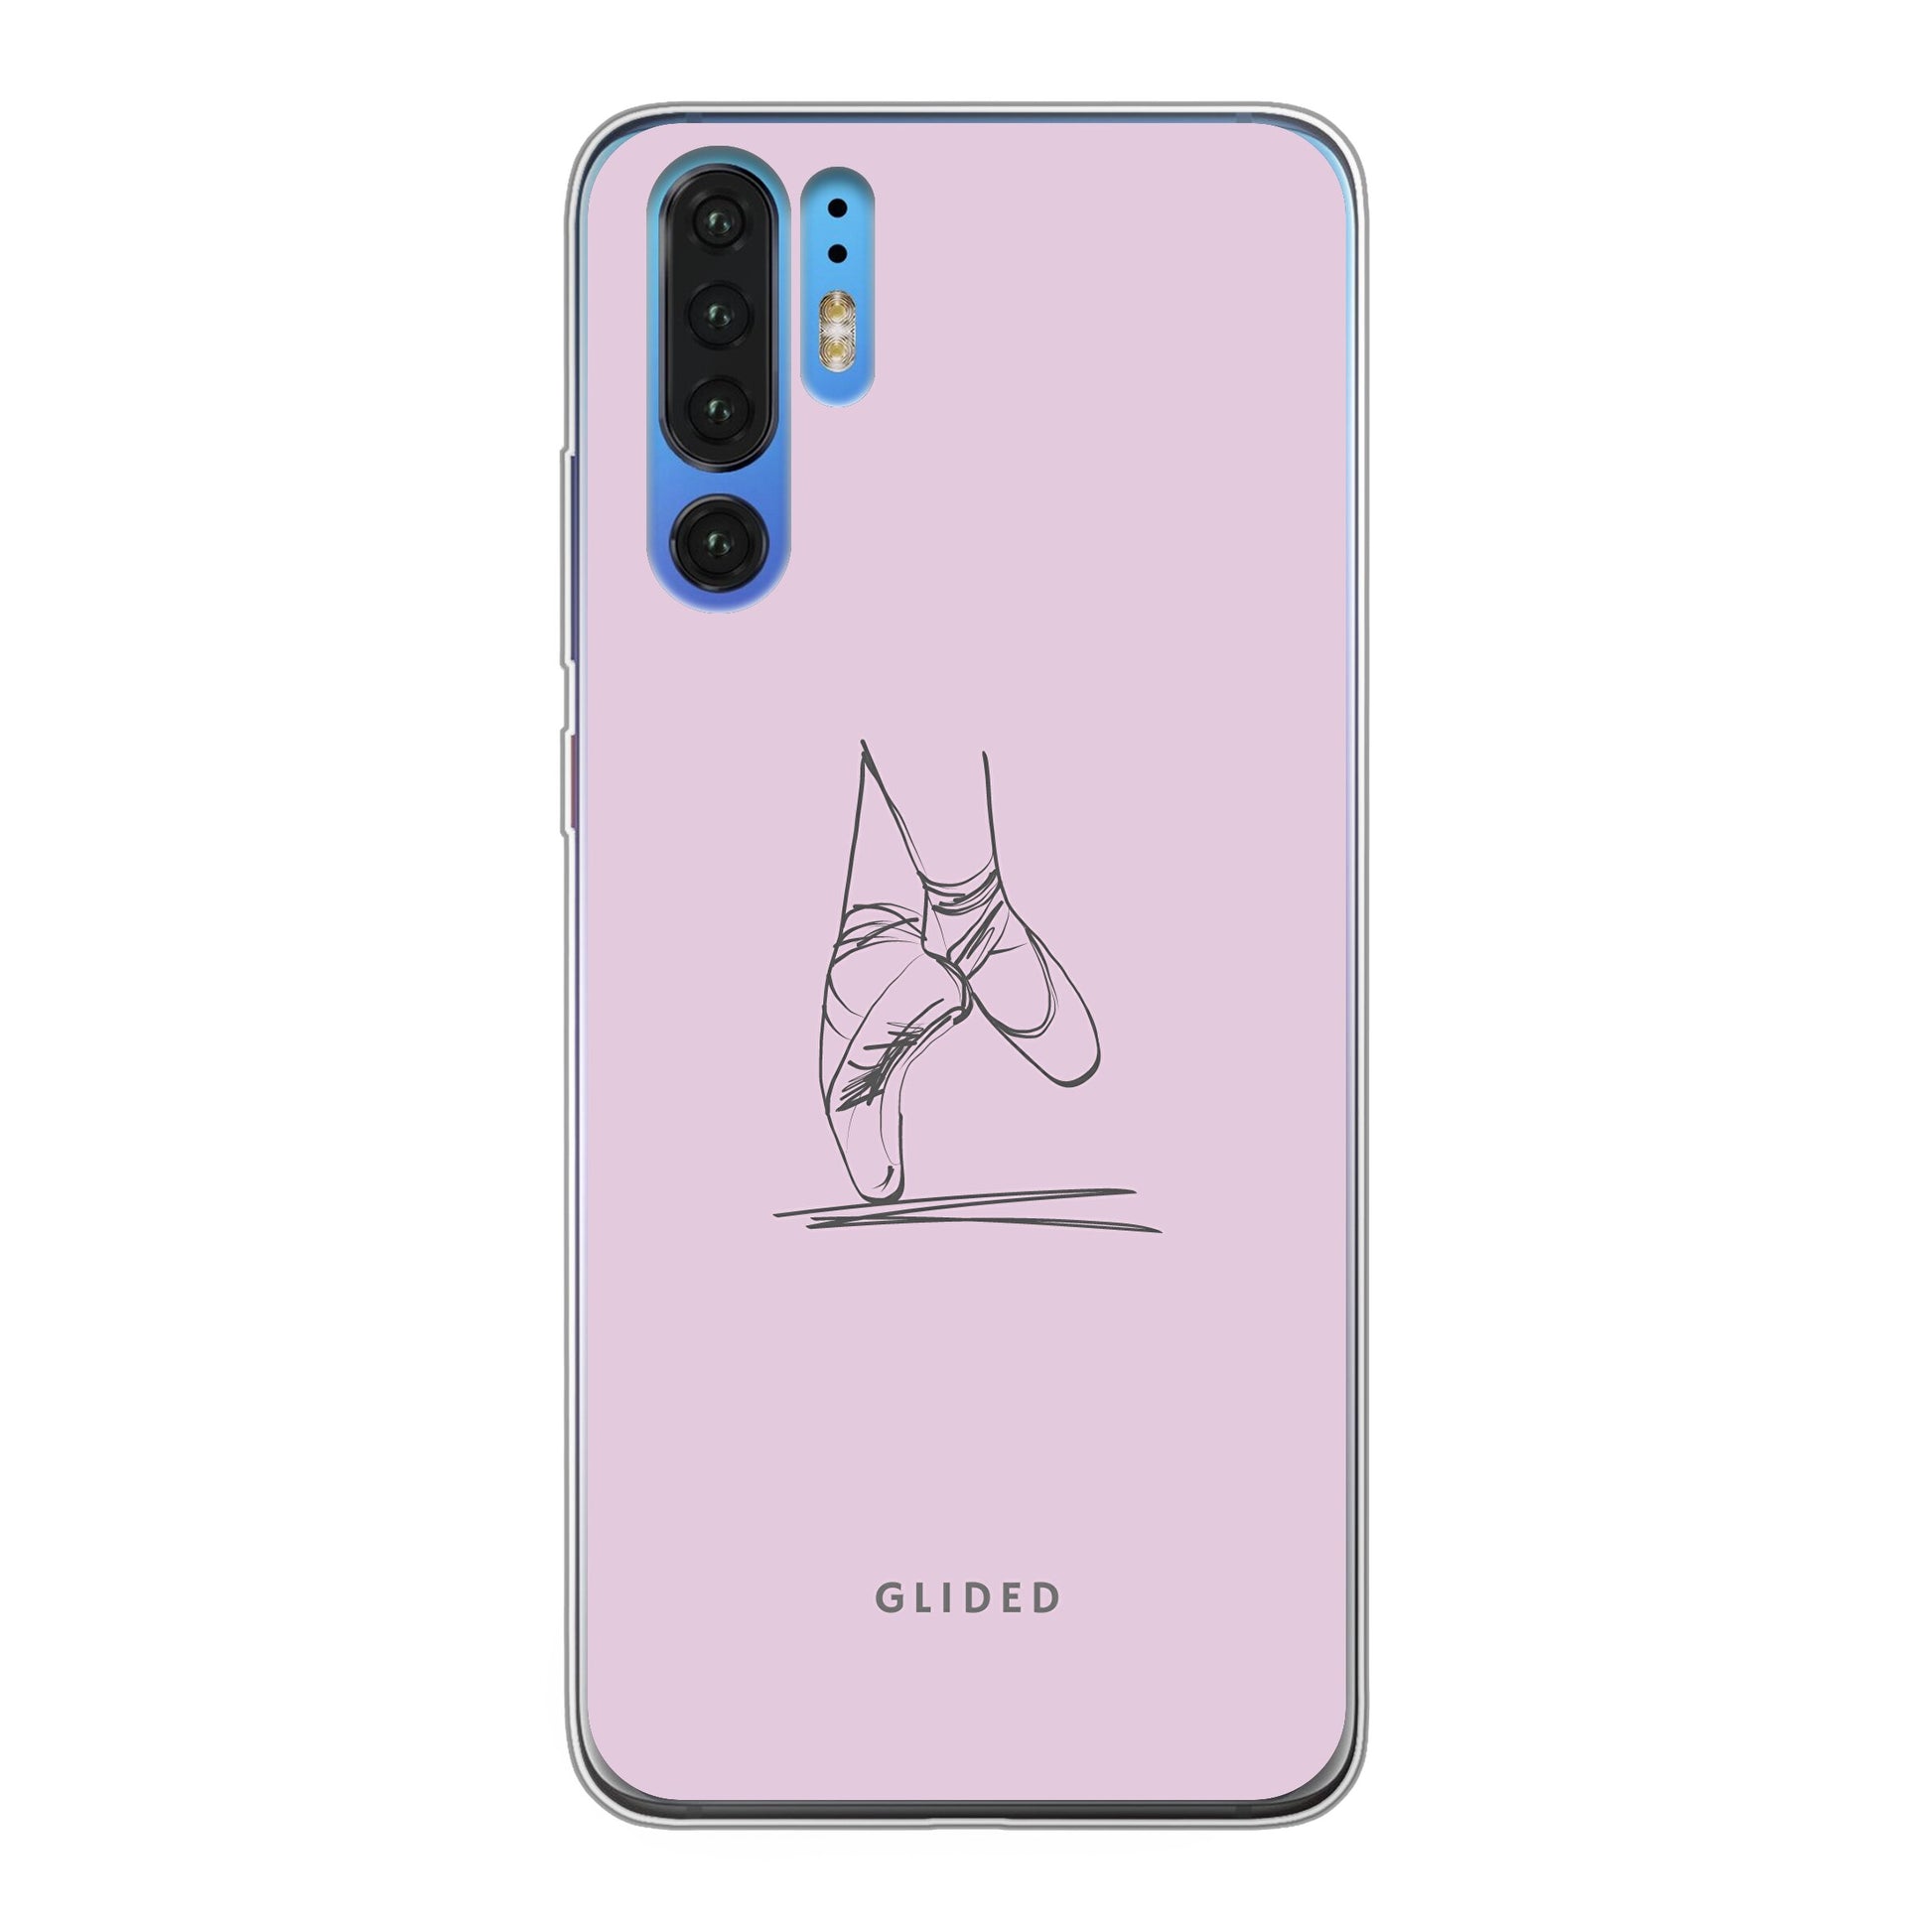 Pointe - Huawei P30 Pro Handyhülle Soft case